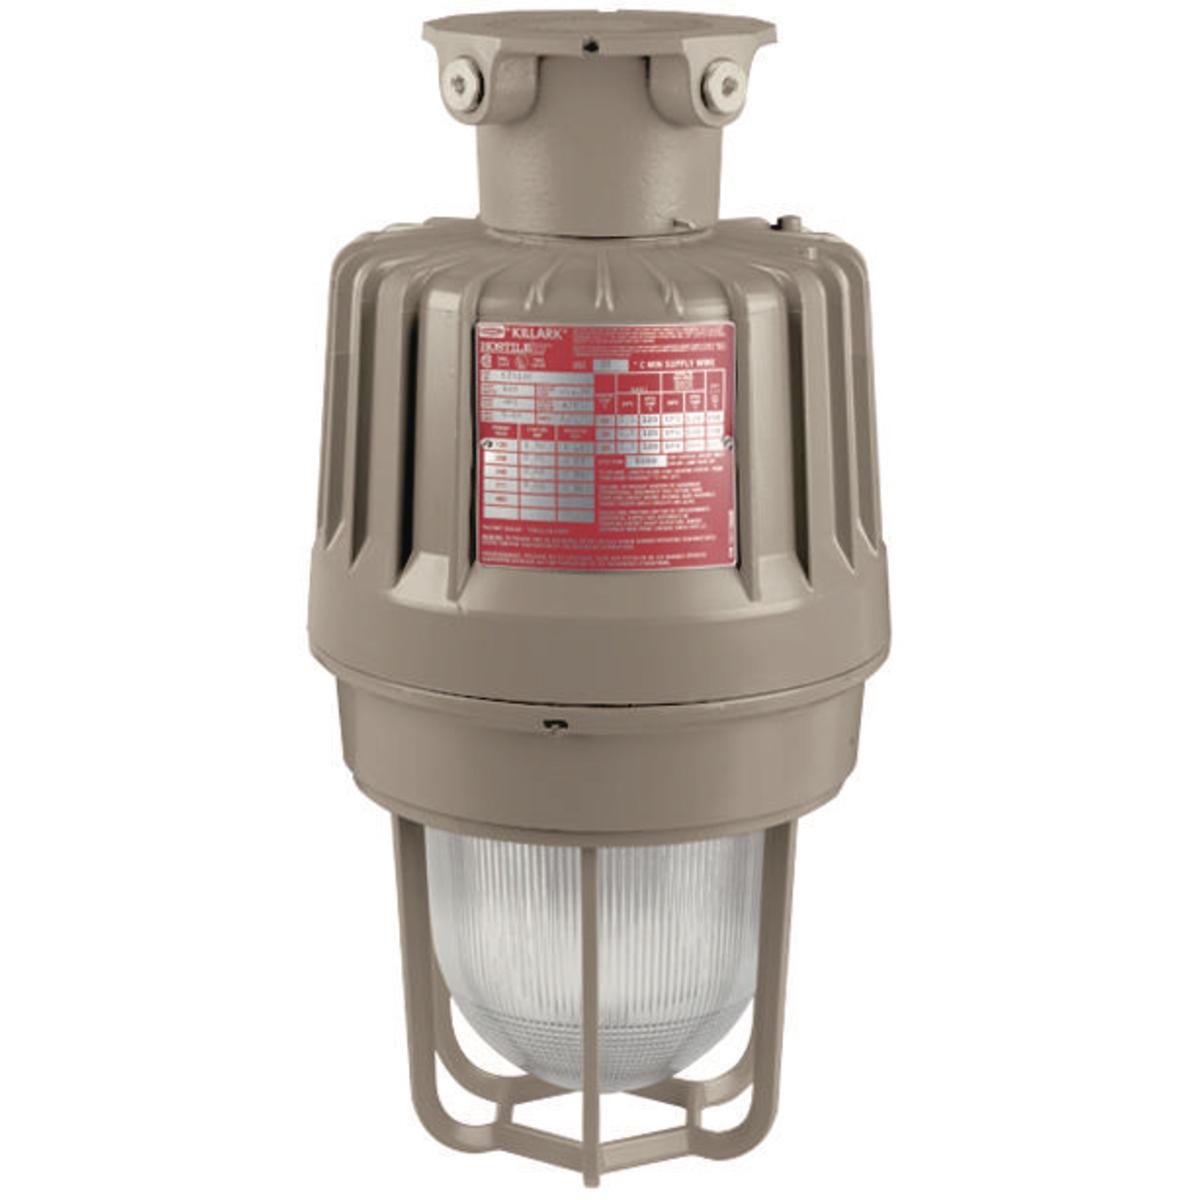 Hubbell EZS250X2G HID 250W Quadri-Volt High Pressure Sodium 3/4" Ceiling Mount with Guard  ; Three light sources – High Pressure Sodium (50-400W), Metal Halide (70-400W) and Pulse Start Metal Halide (175-400W) ; Mounting choice –Pendant, ceiling, 25˚ stanchion or 90˚ wall 